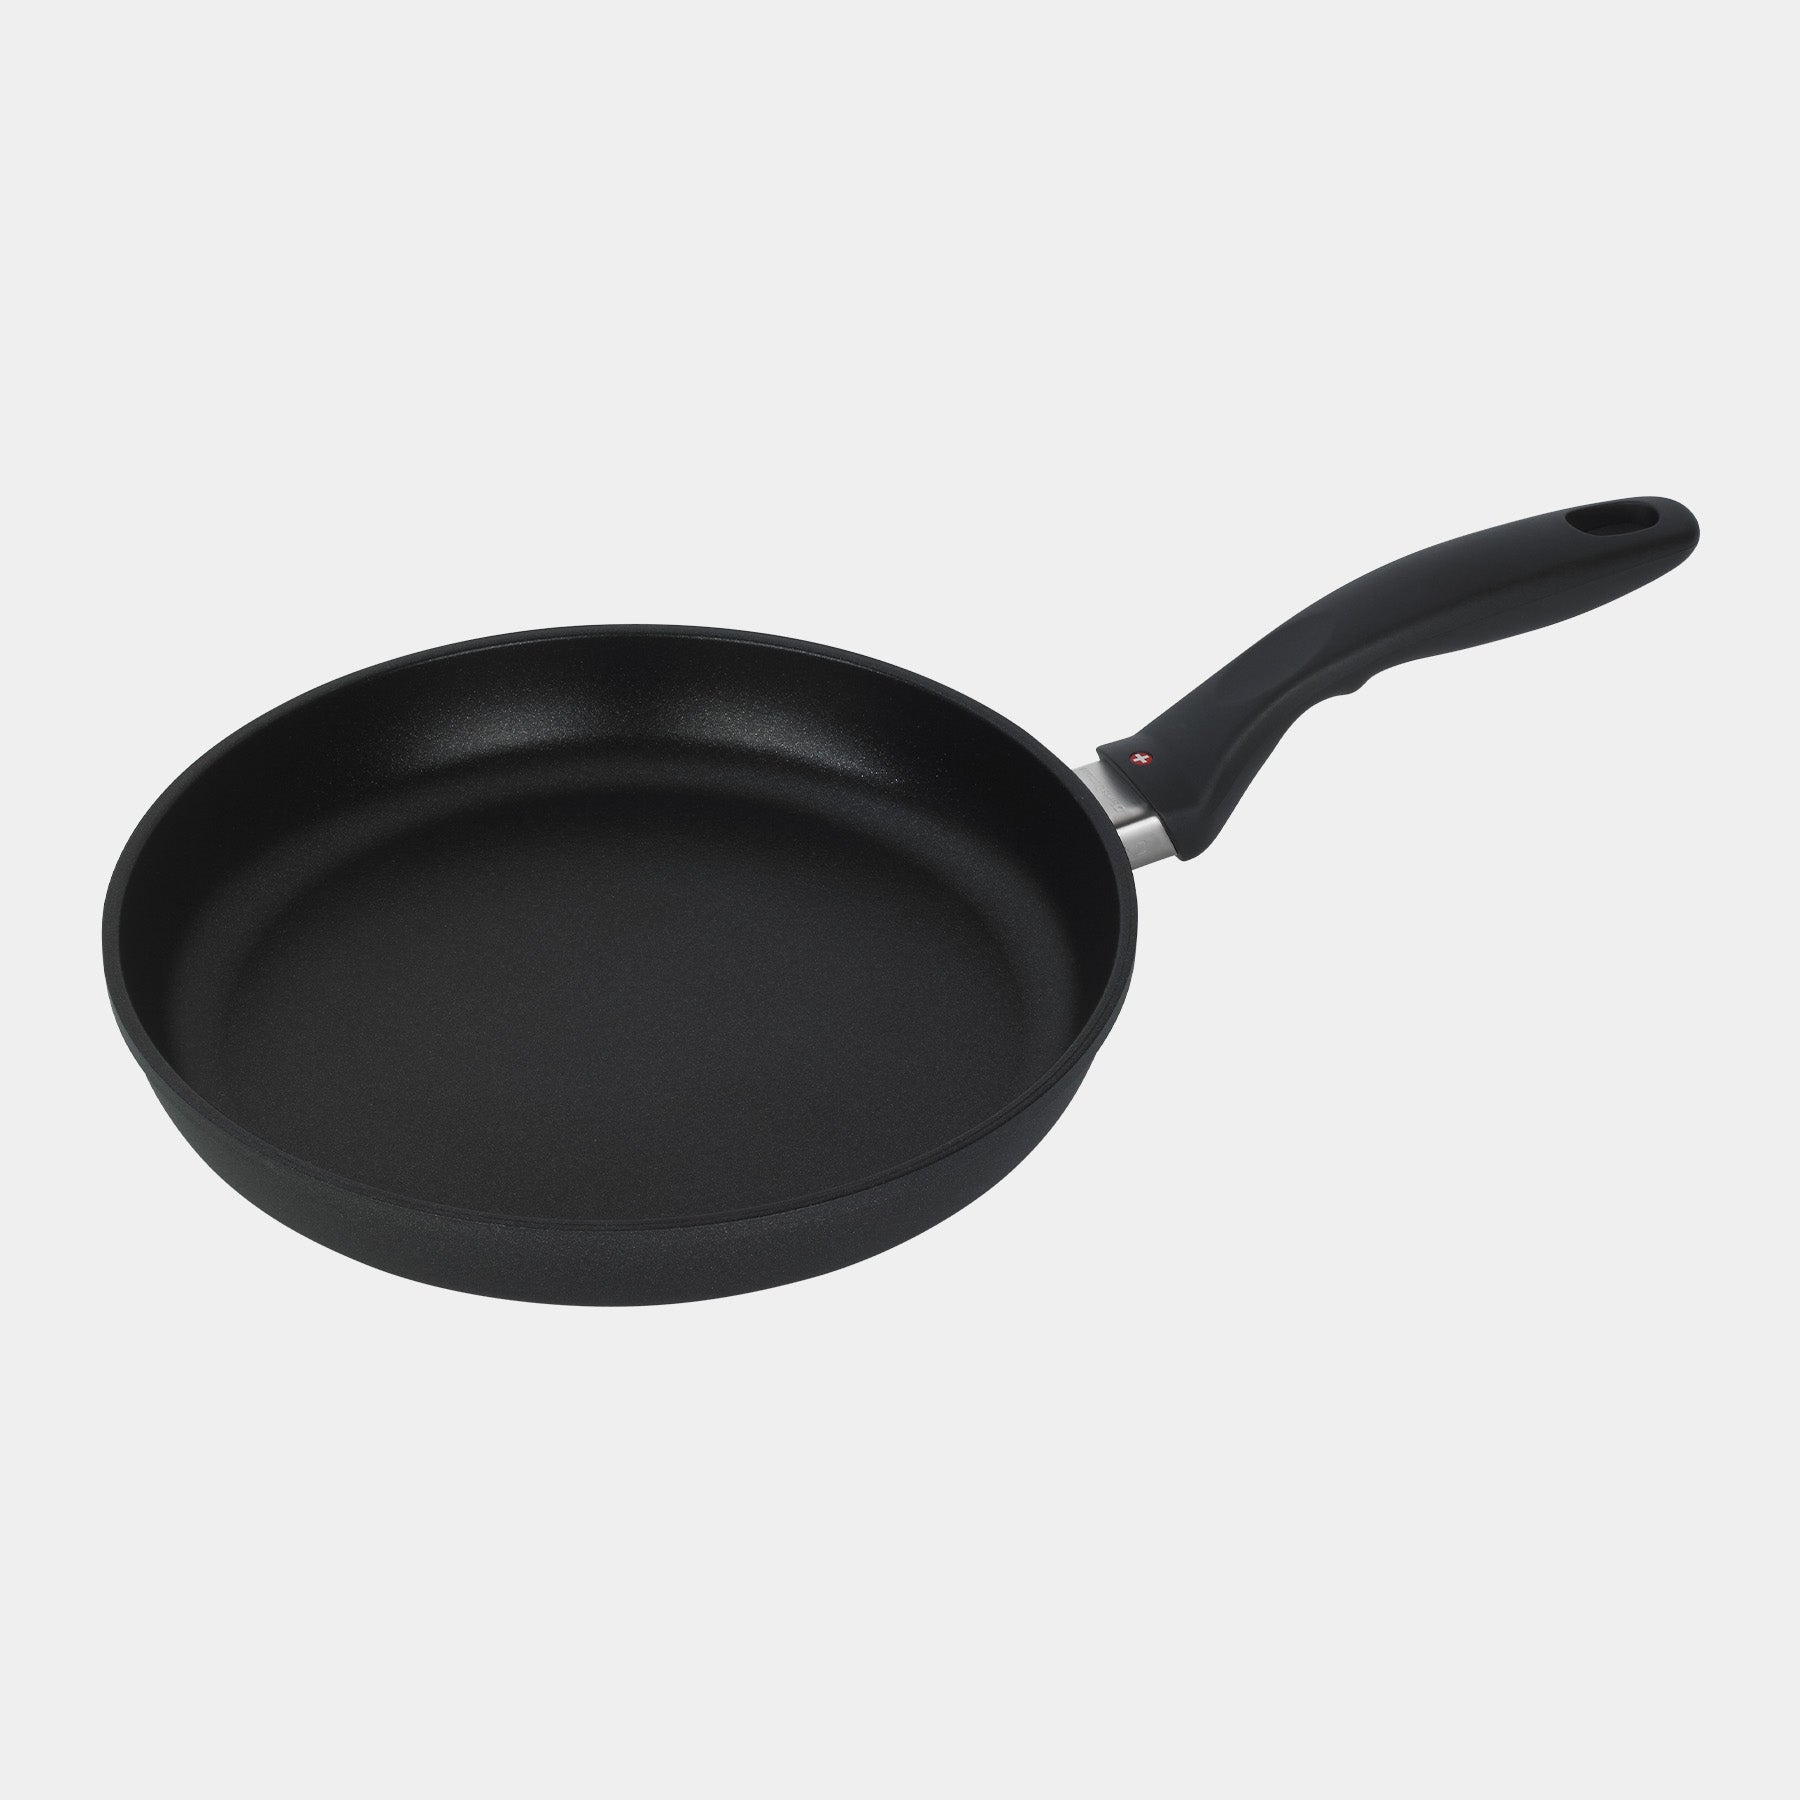 XD Nonstick 10.25" Fry Pan with glass lid - Induction top view